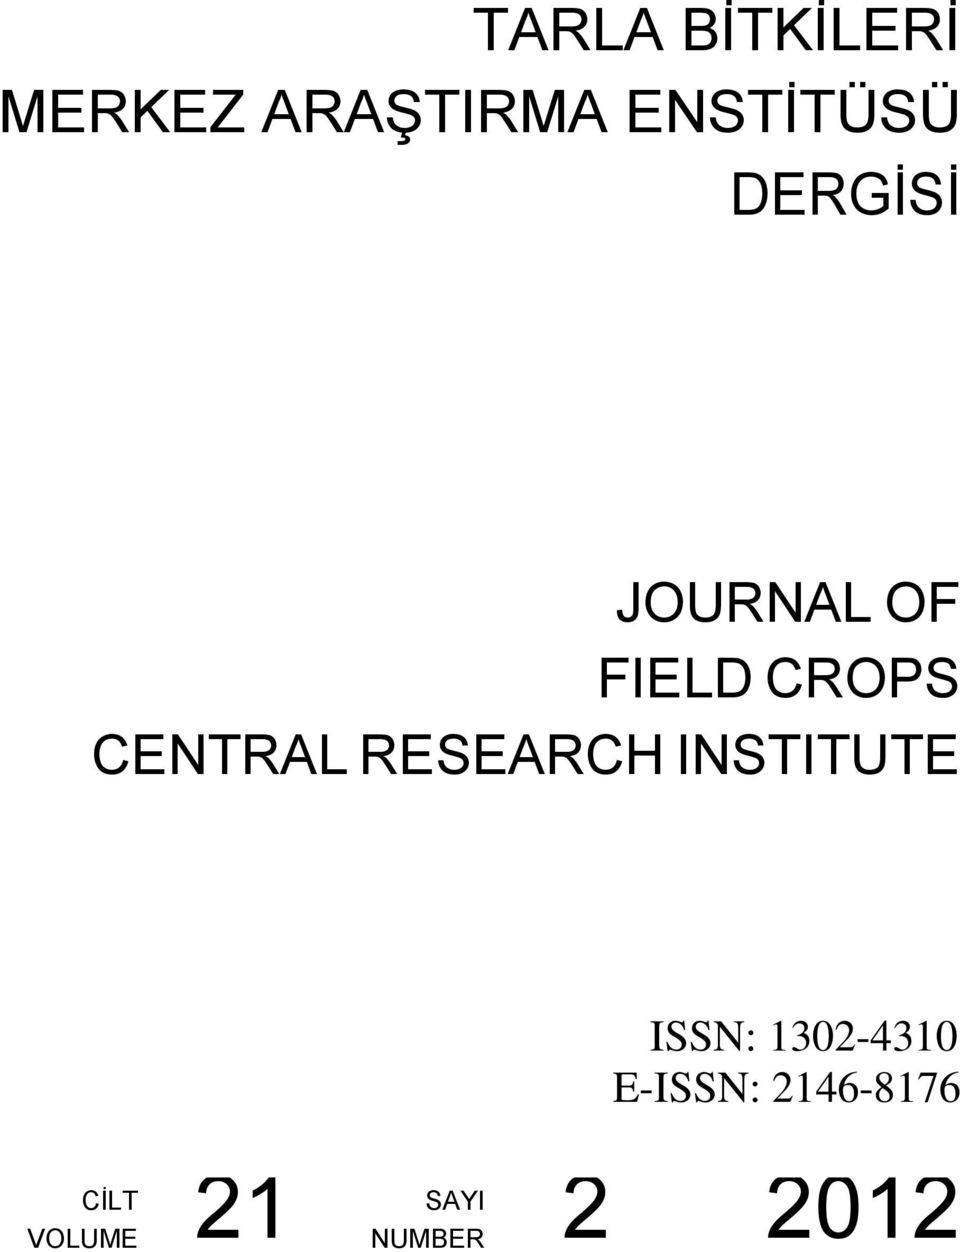 CENTRAL RESEARCH INSTITUTE ISSN: